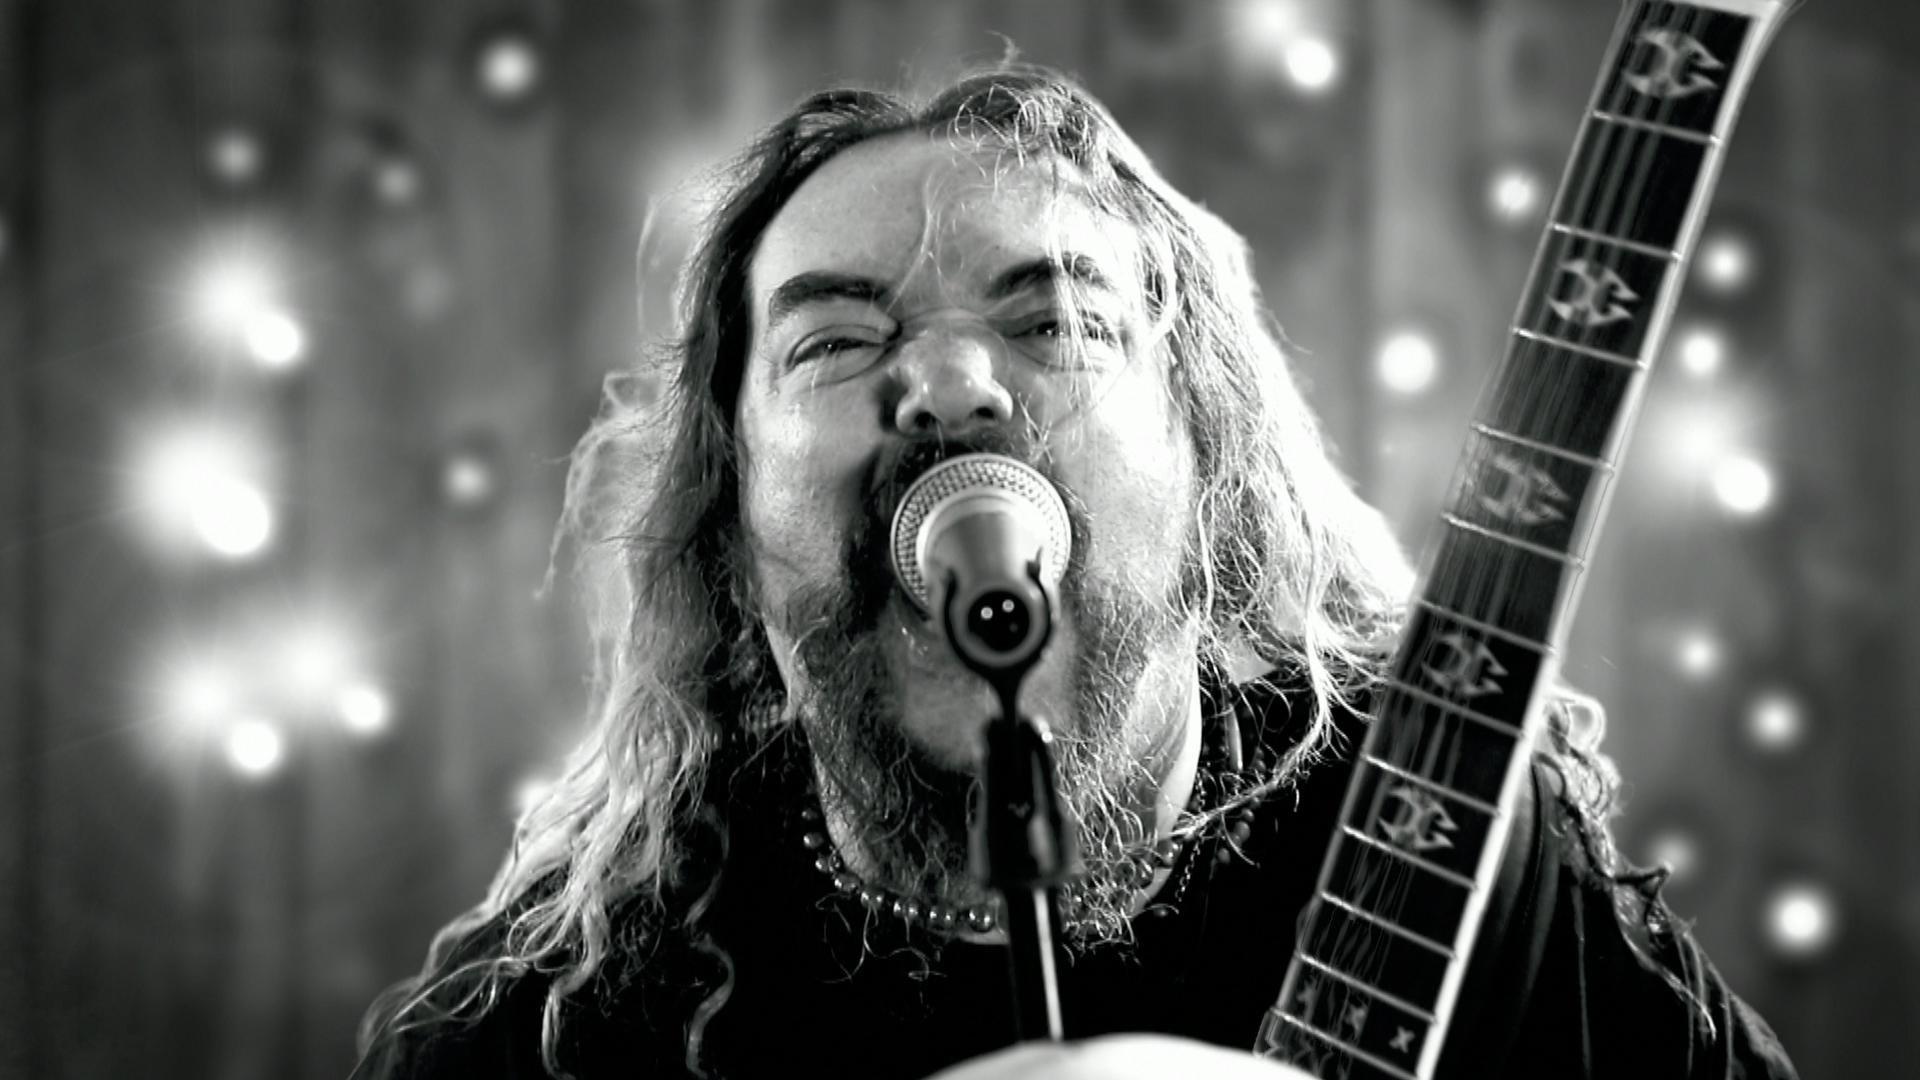 Soulfly Cavalera of Soulfly performing live on stage at